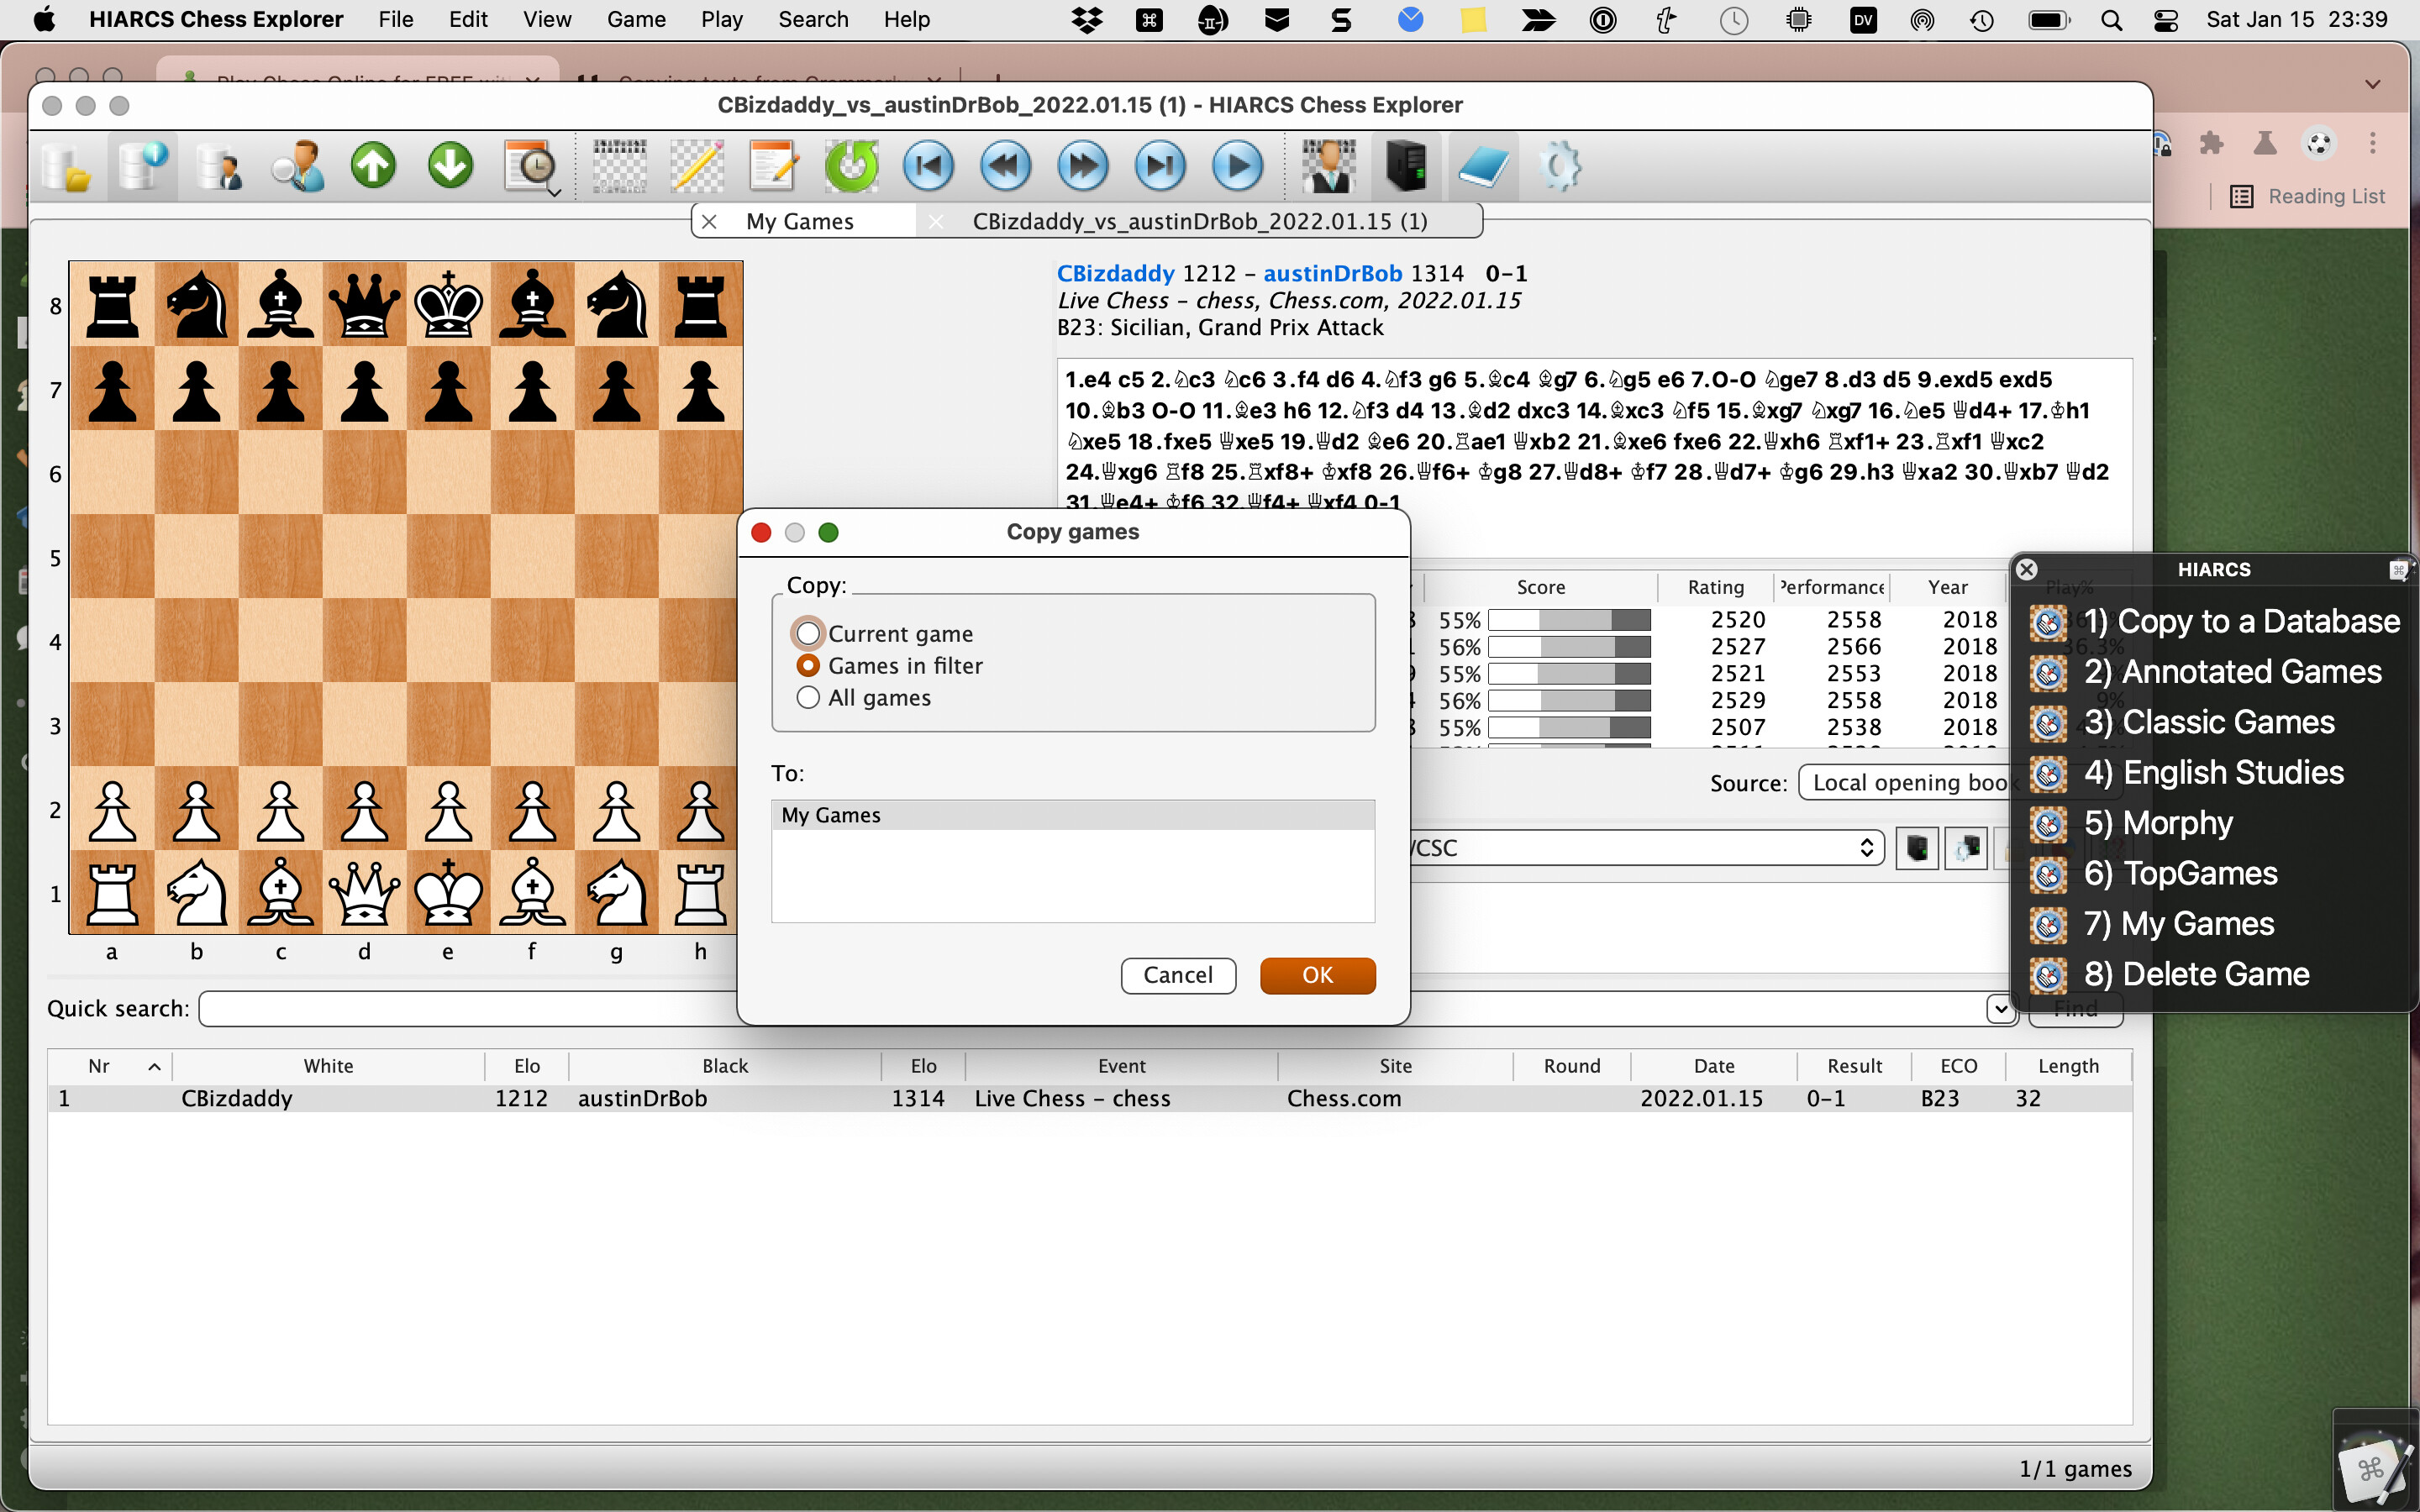 why is the privat Opening Explorer so limited? - Chess Forums 